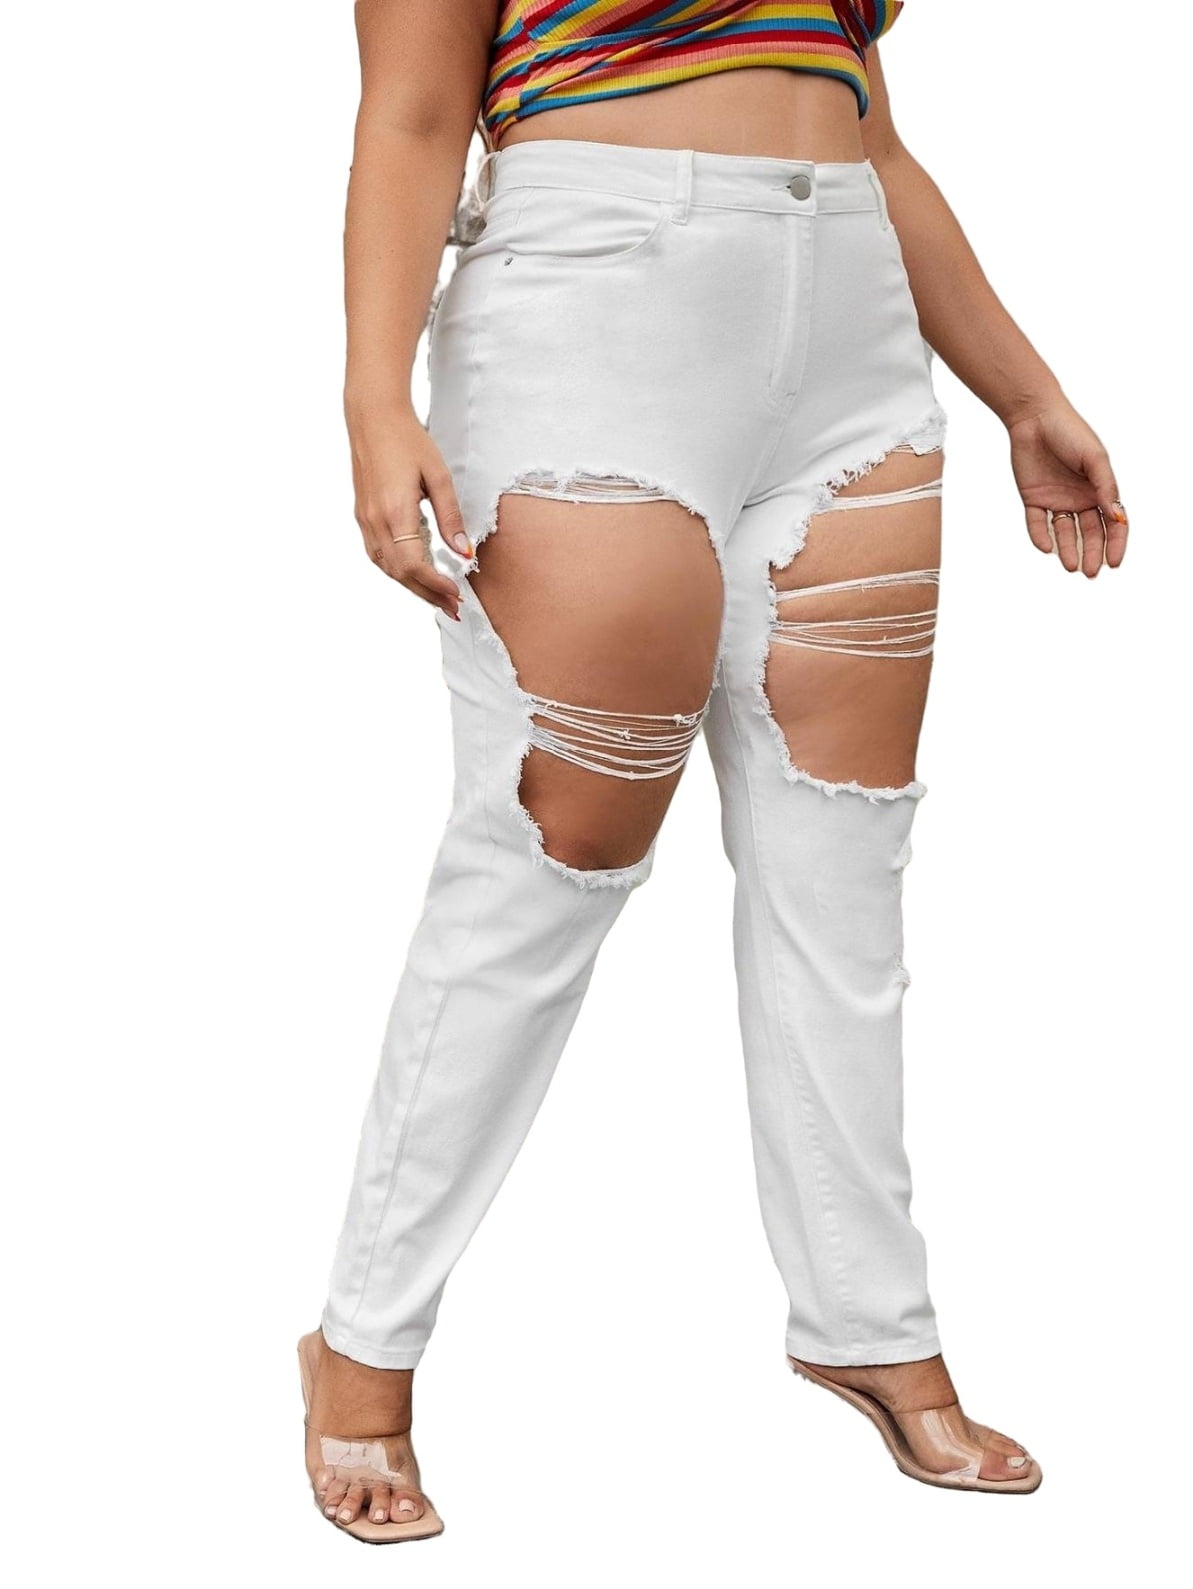 Women's Ripped Skinny Jeans Stretchy Pants White - Walmart.com